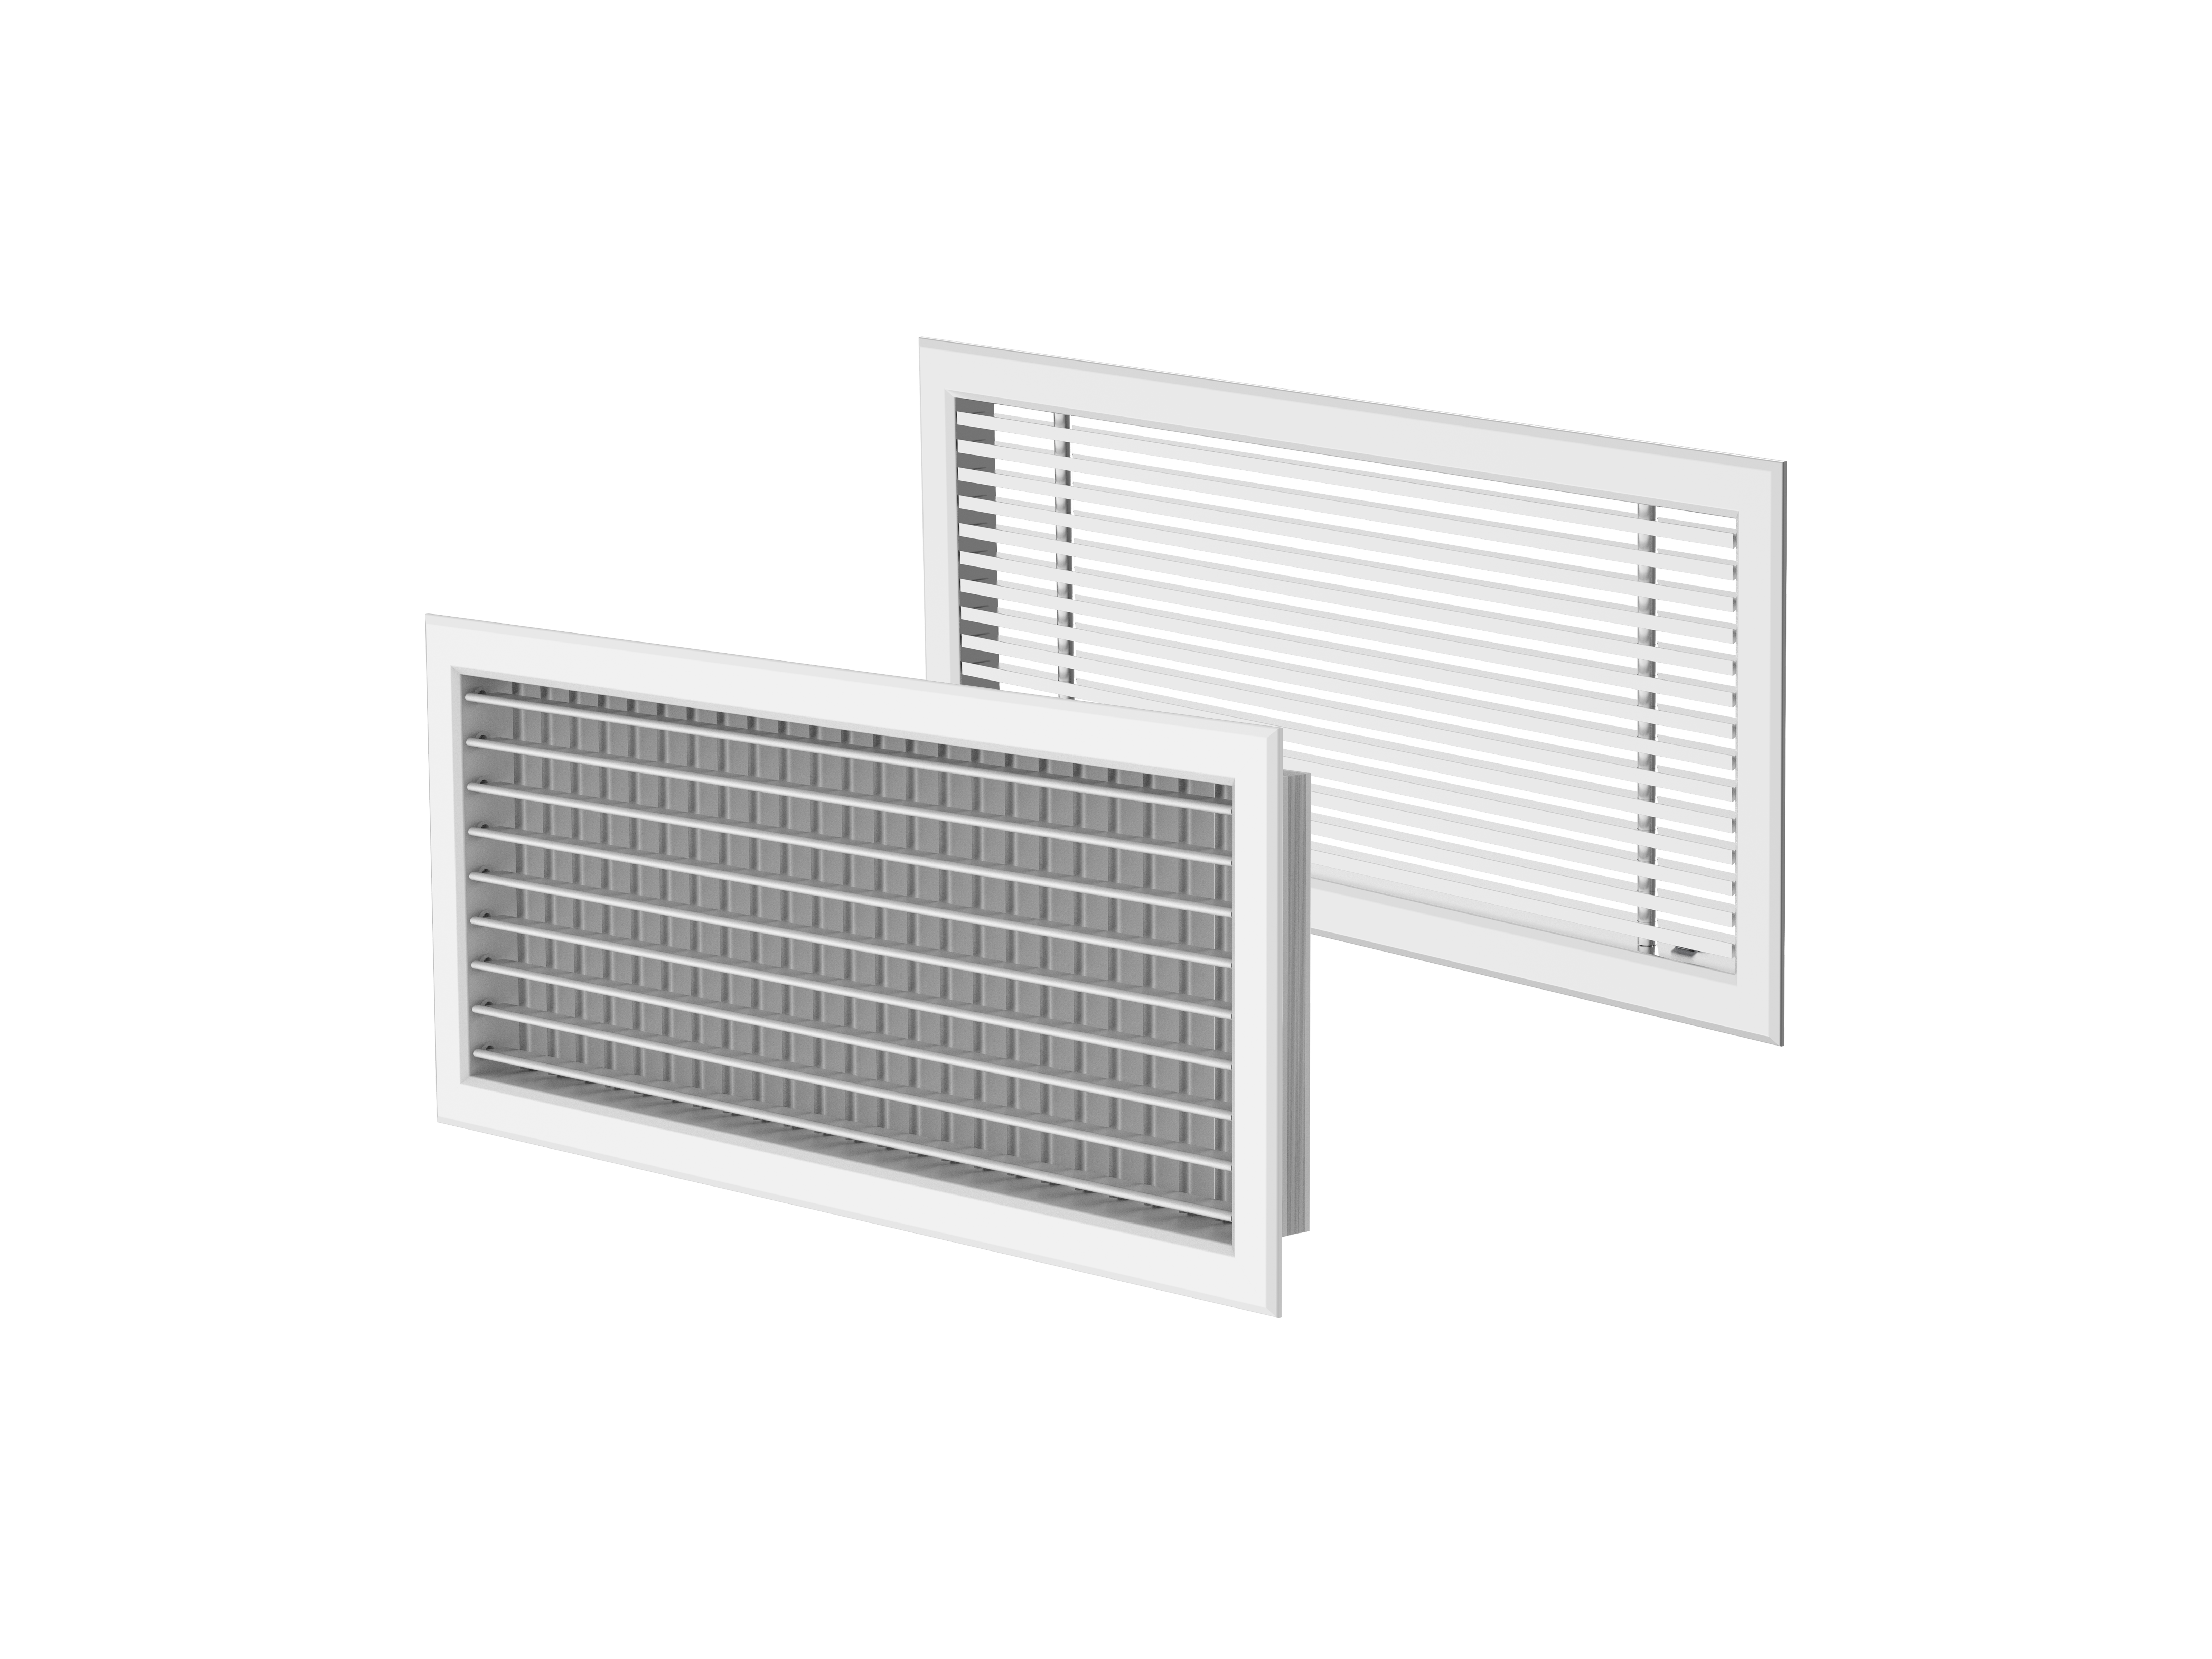 NOVA - Grilles - Air Distribution Products - Products - Systemair